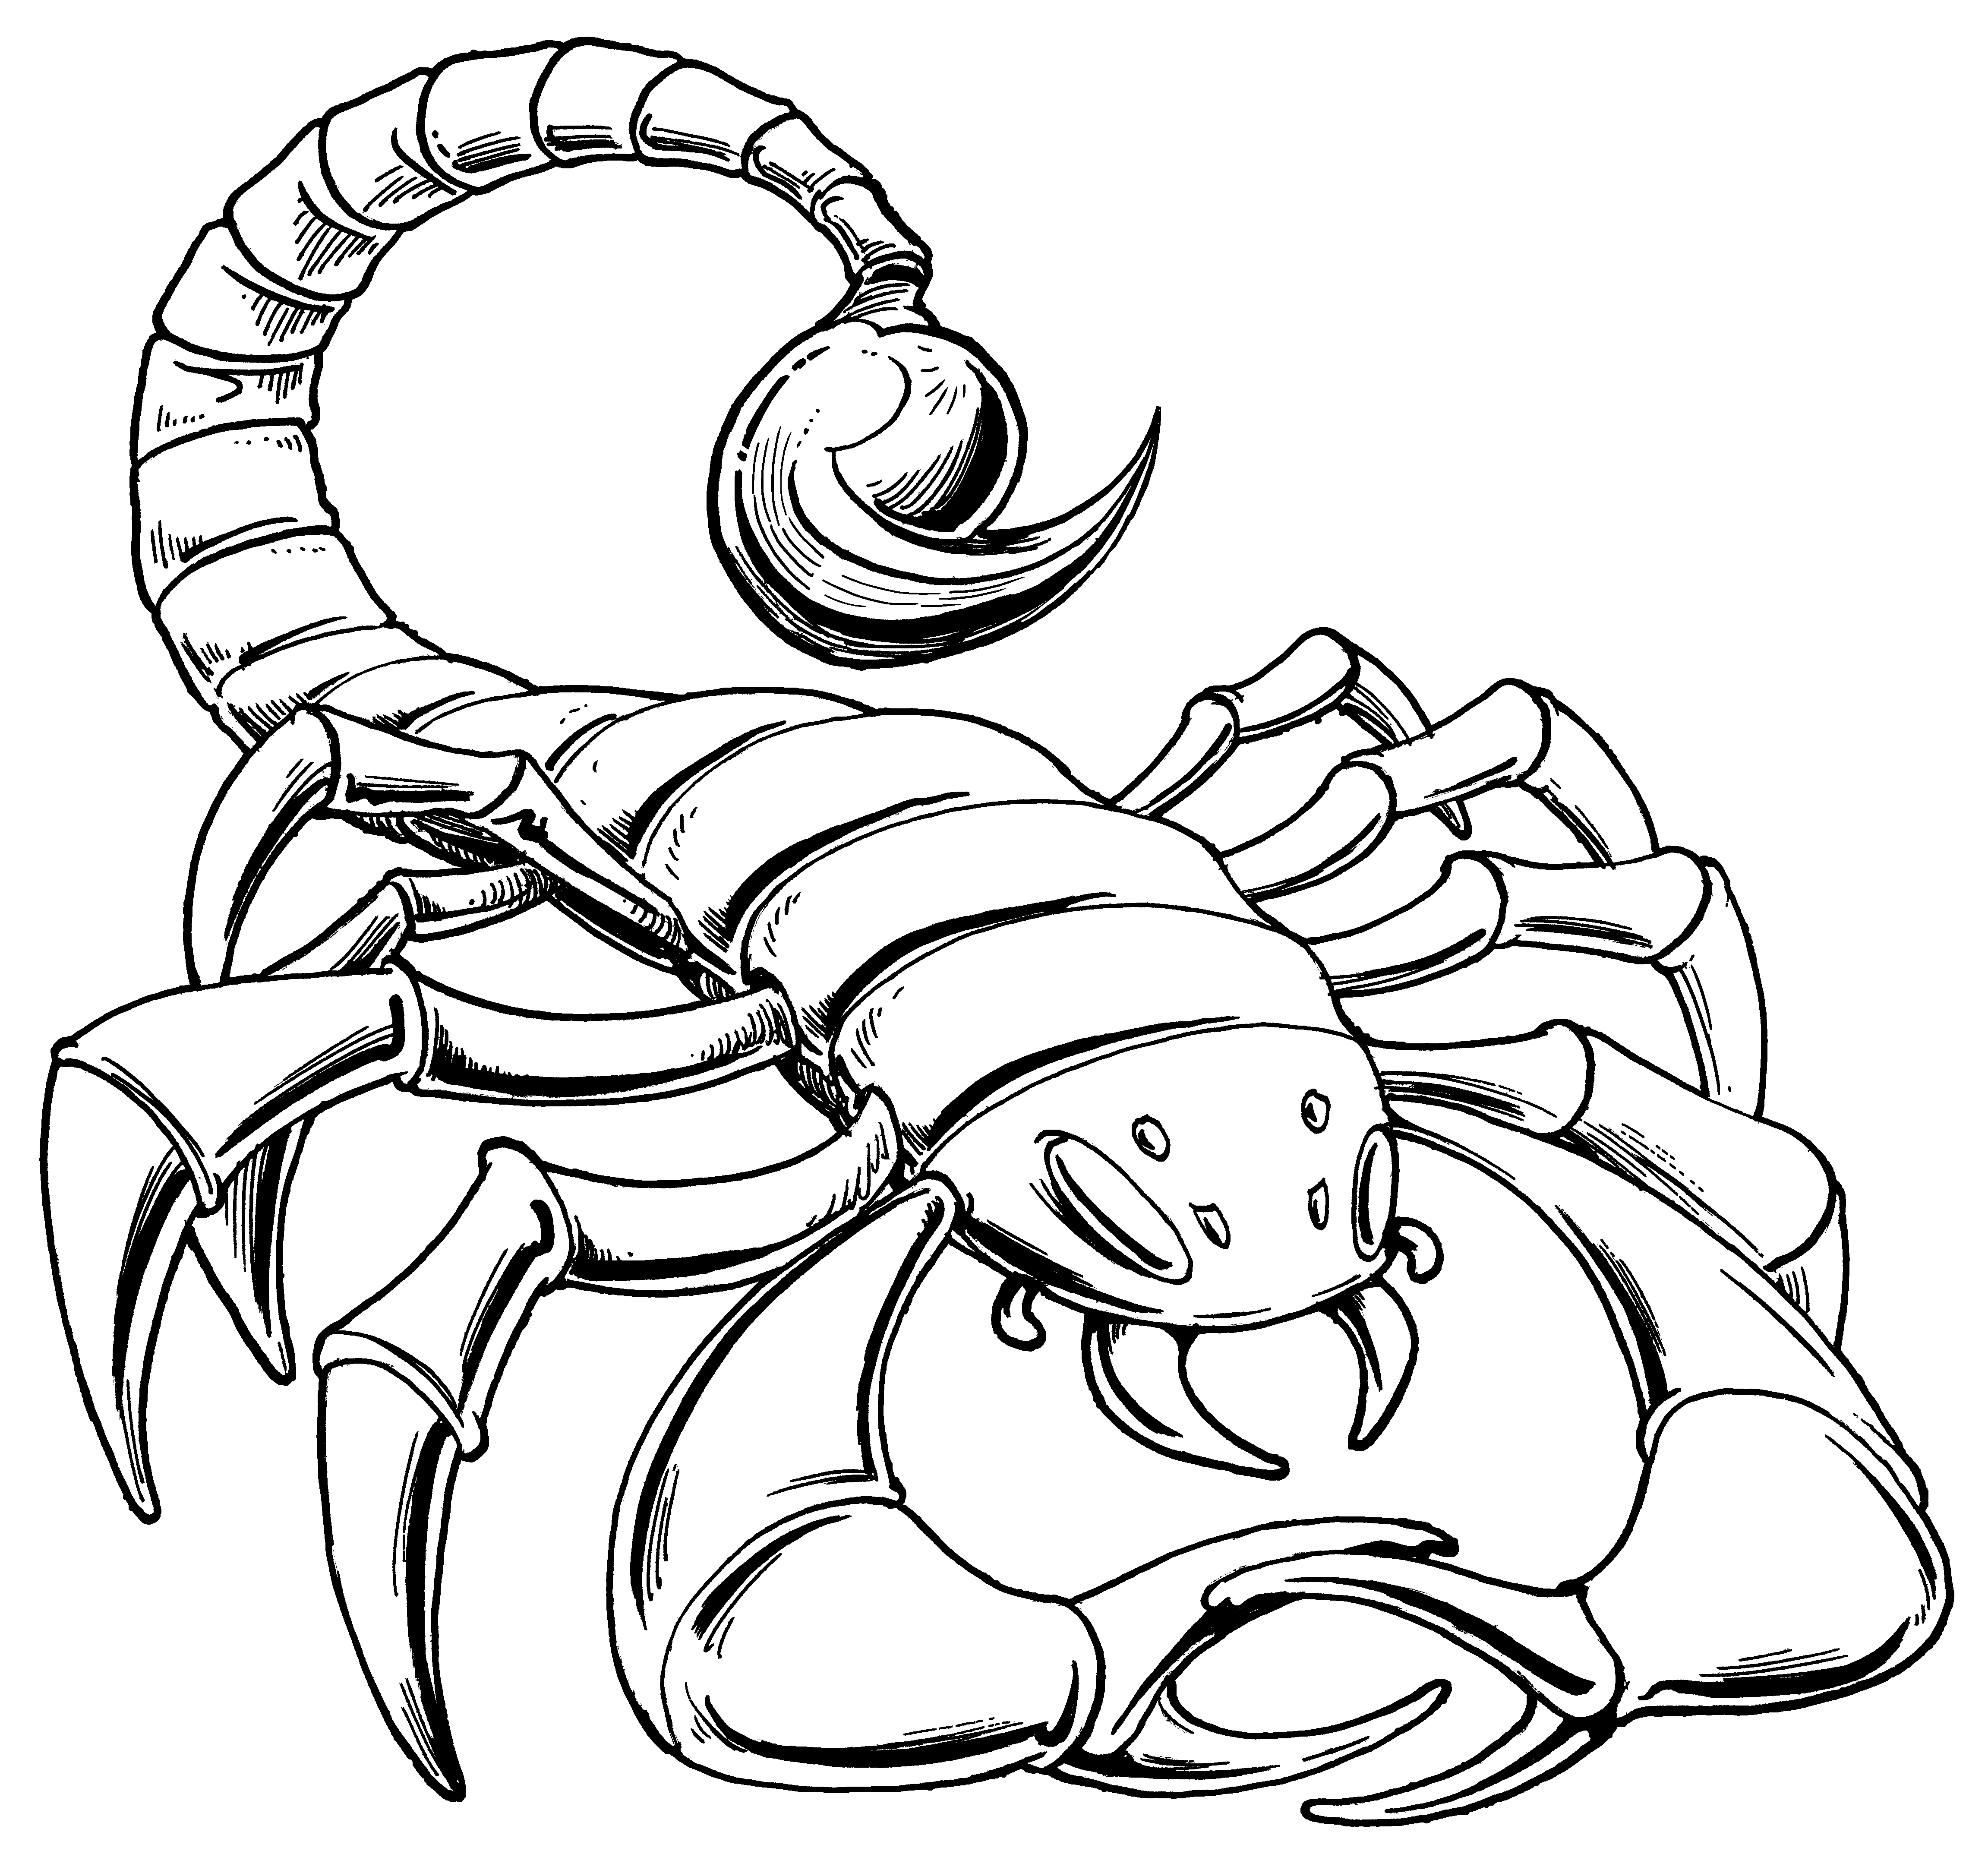 Scorpion Line Drawing Free download on ClipArtMag